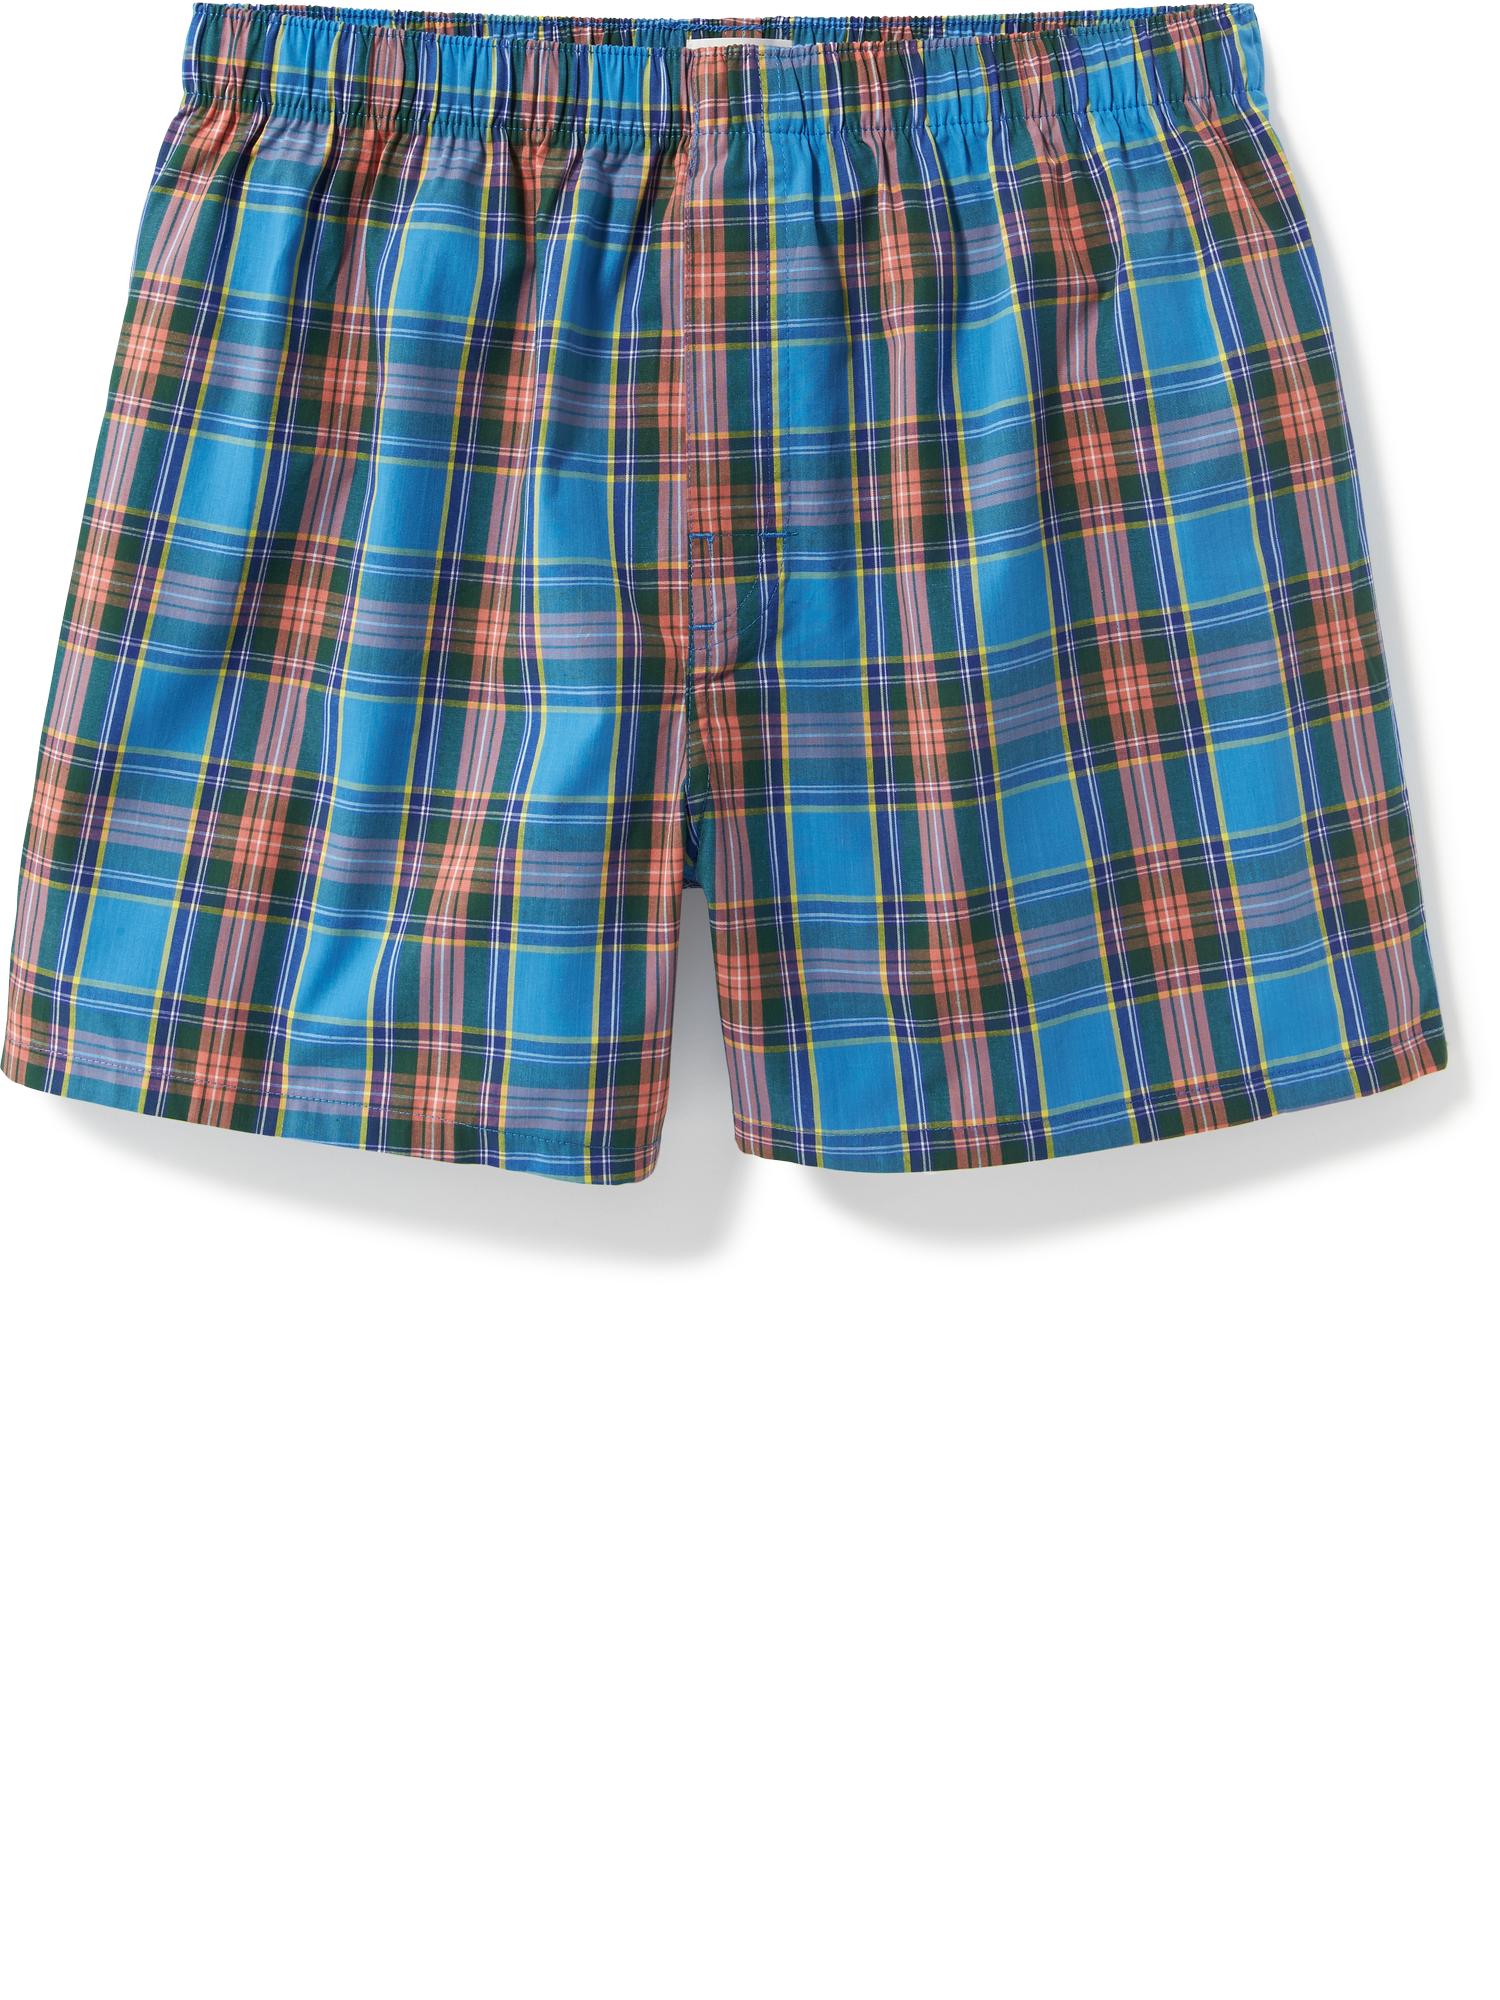 Plaid Boxers for Men | Old Navy